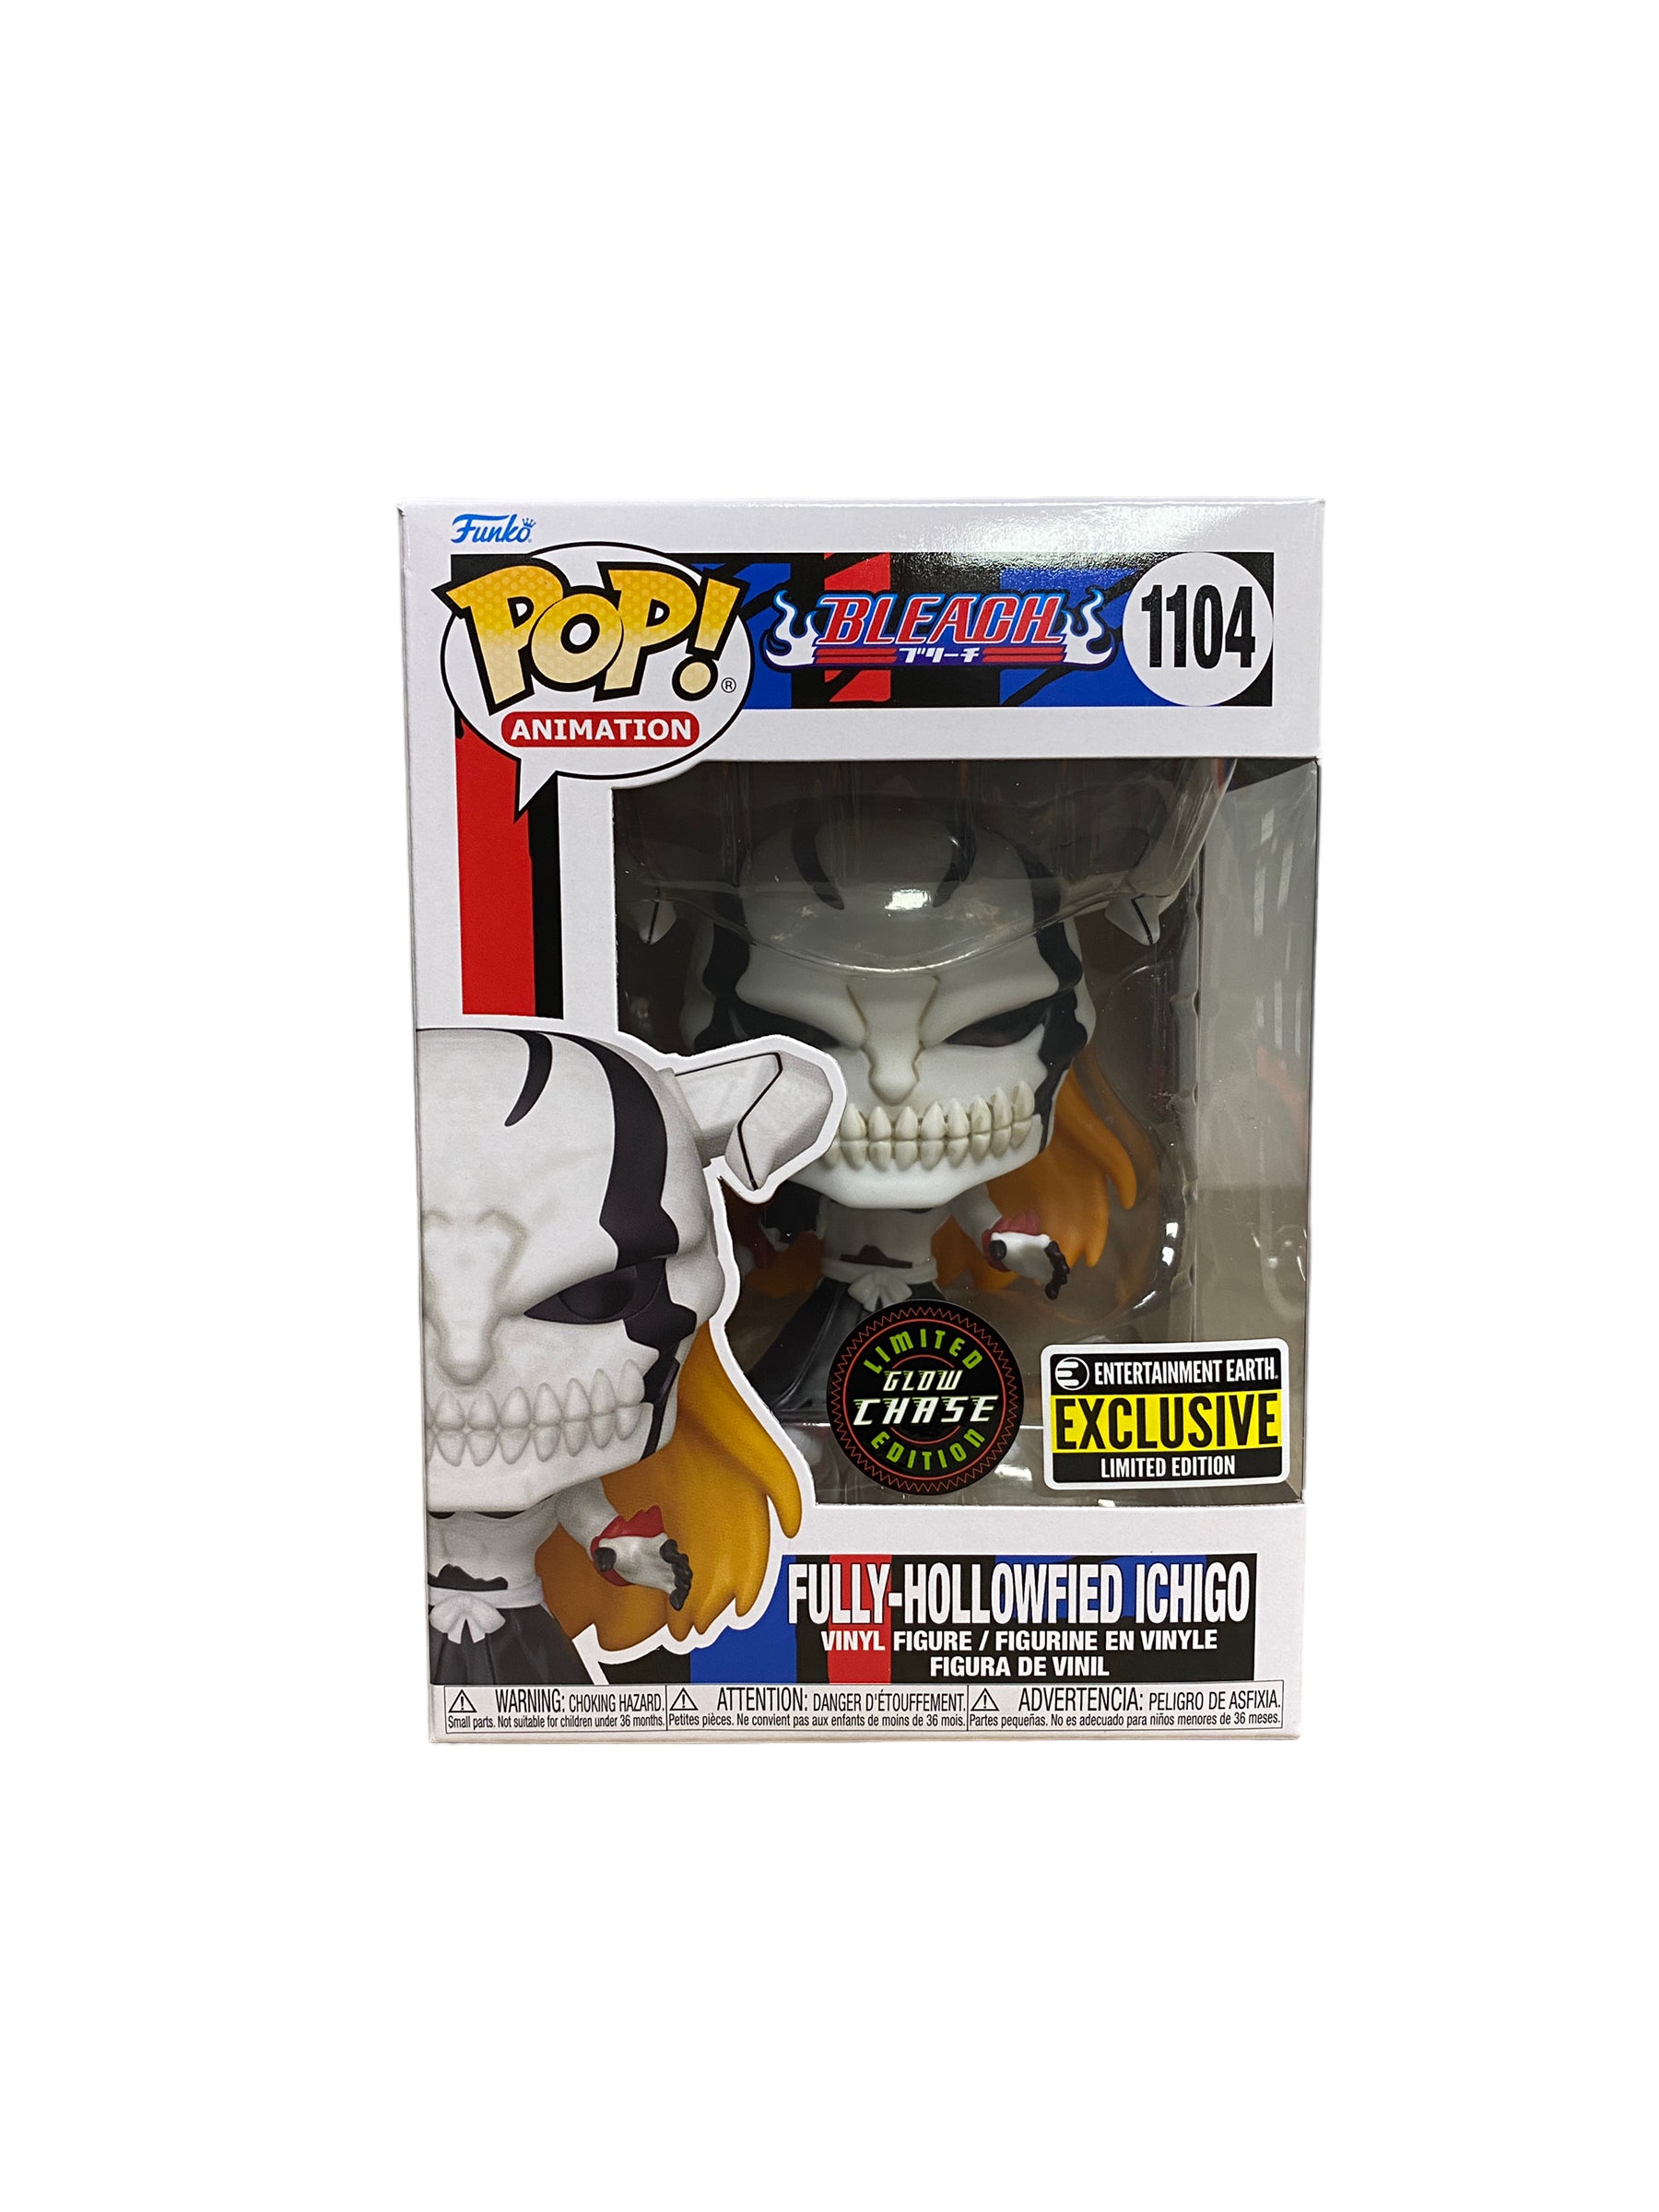 Fully-Hollowfied Ichigo #1104 (Glow Chase) Funko Pop! - Bleach - Entertainment Earth Exclusive - Condition 8.75/10